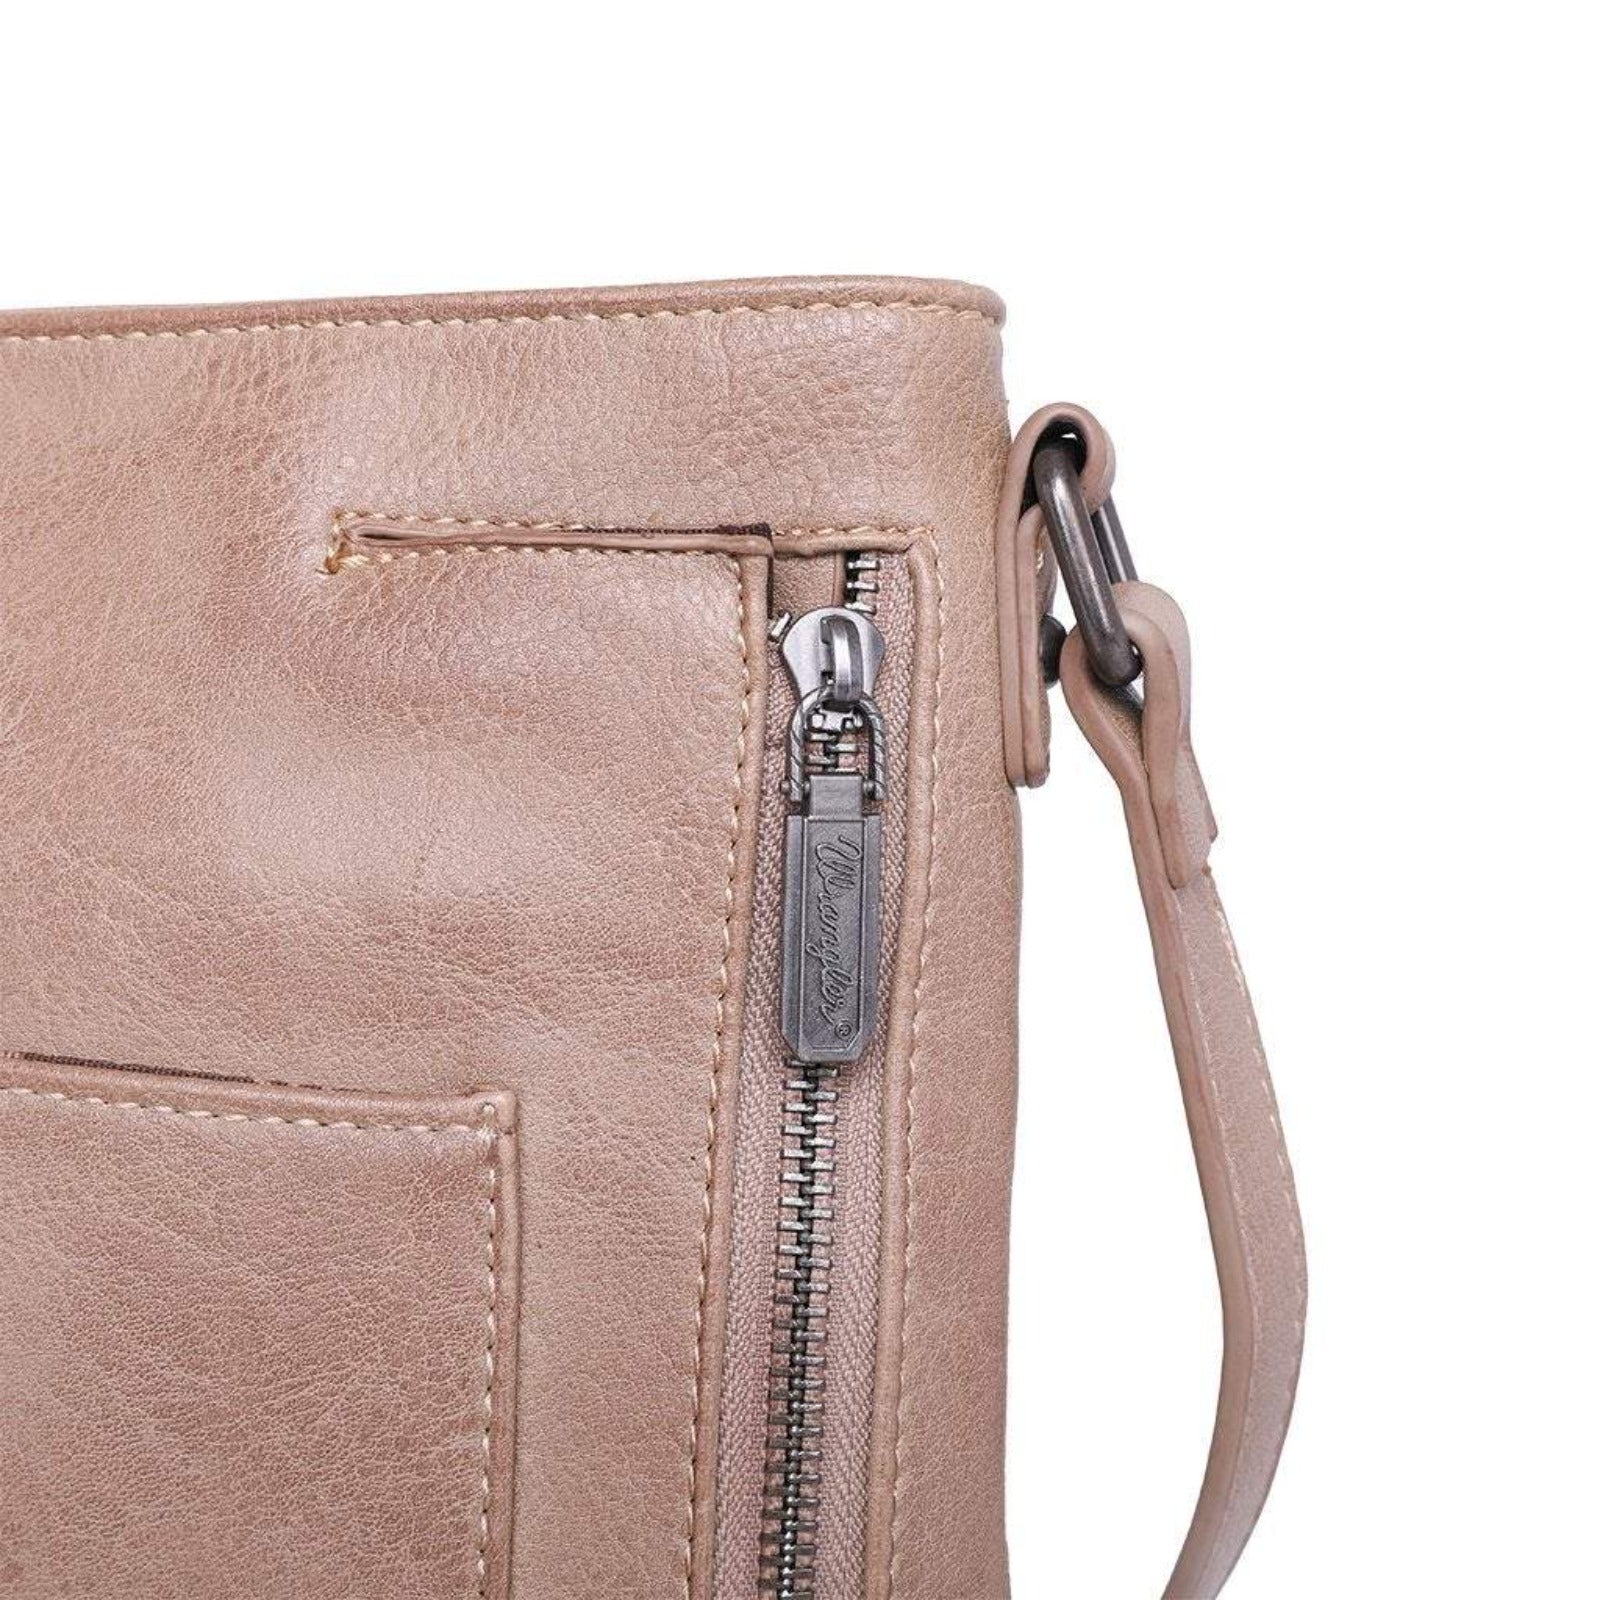 Wrangler Stitch Accent Concealed Carry Crossbody - Cowgirl Wear